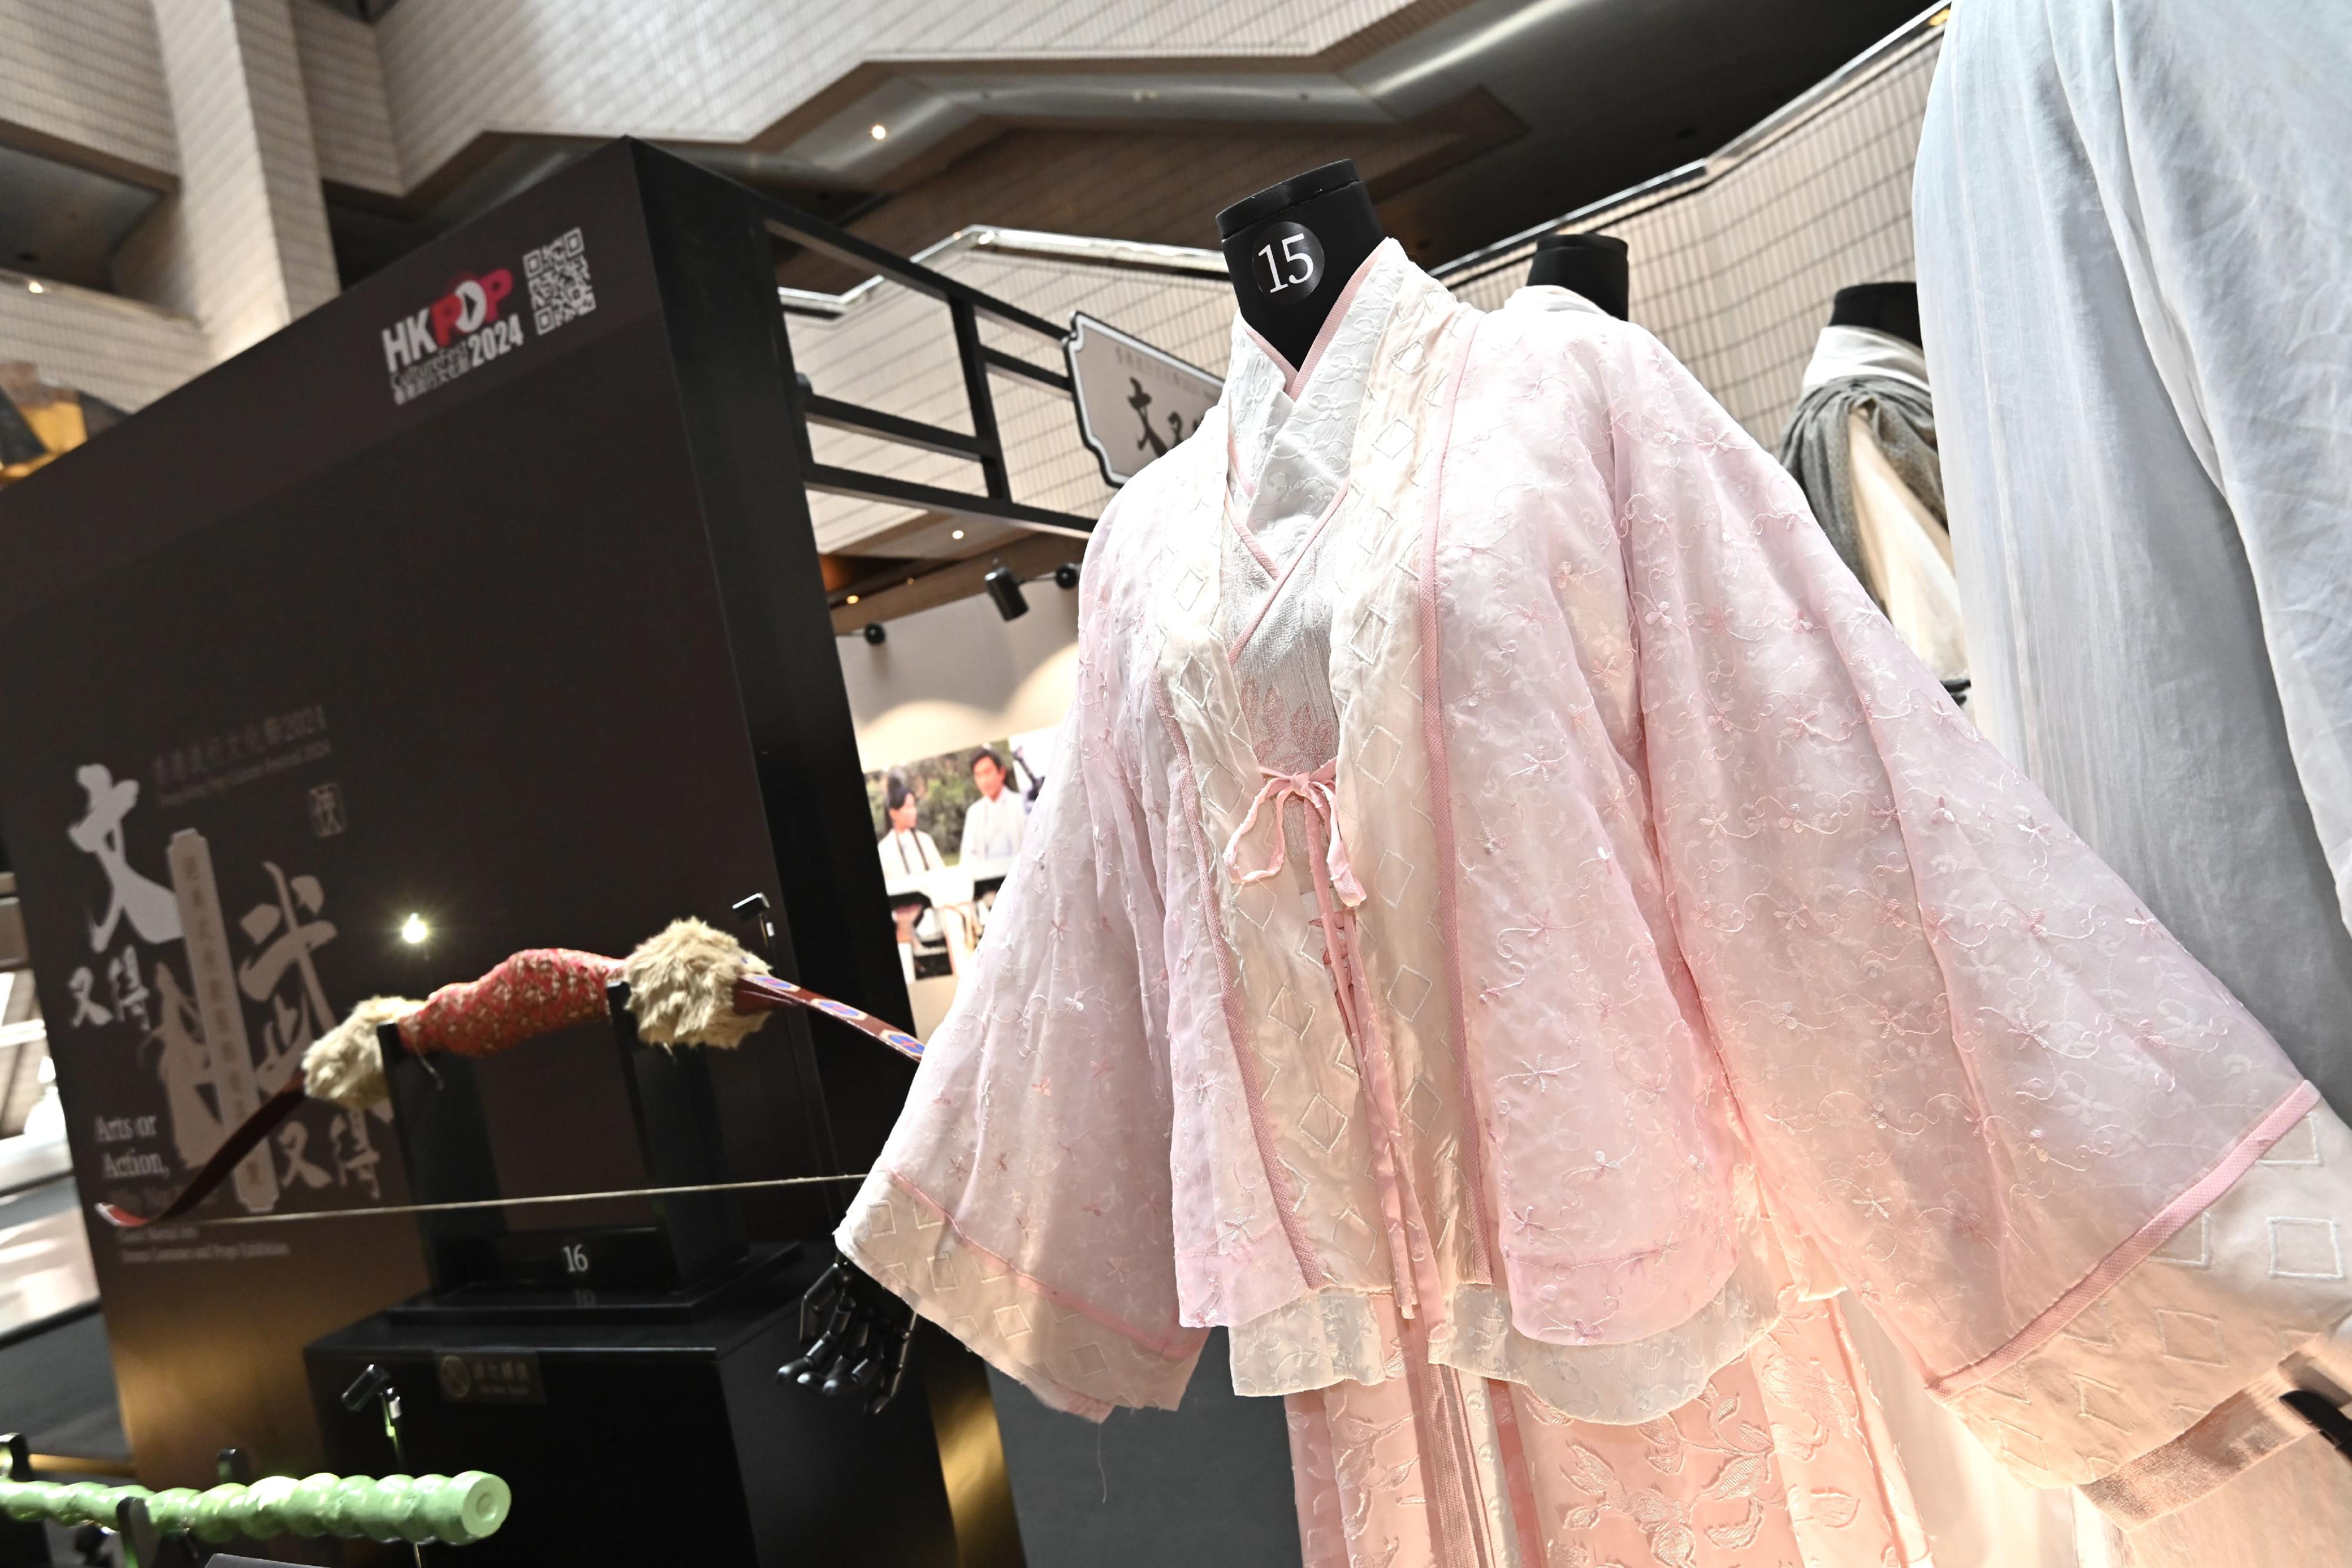 To tie in with its theme "Arts and Action", the second Hong Kong Pop Culture Festival is running a vast range of programmes inspired by martial arts novels. Among them is the "Classic Martial Arts Drama Costumes and Props Exhibition" under the "Arts or Action, Why Not Both?" series, which opened today (April 17) at the foyer of the Hong Kong Cultural Centre. Photo shows the costume of Zhou Zhiruo in "The Heaven Sword and Dragon Sabre".